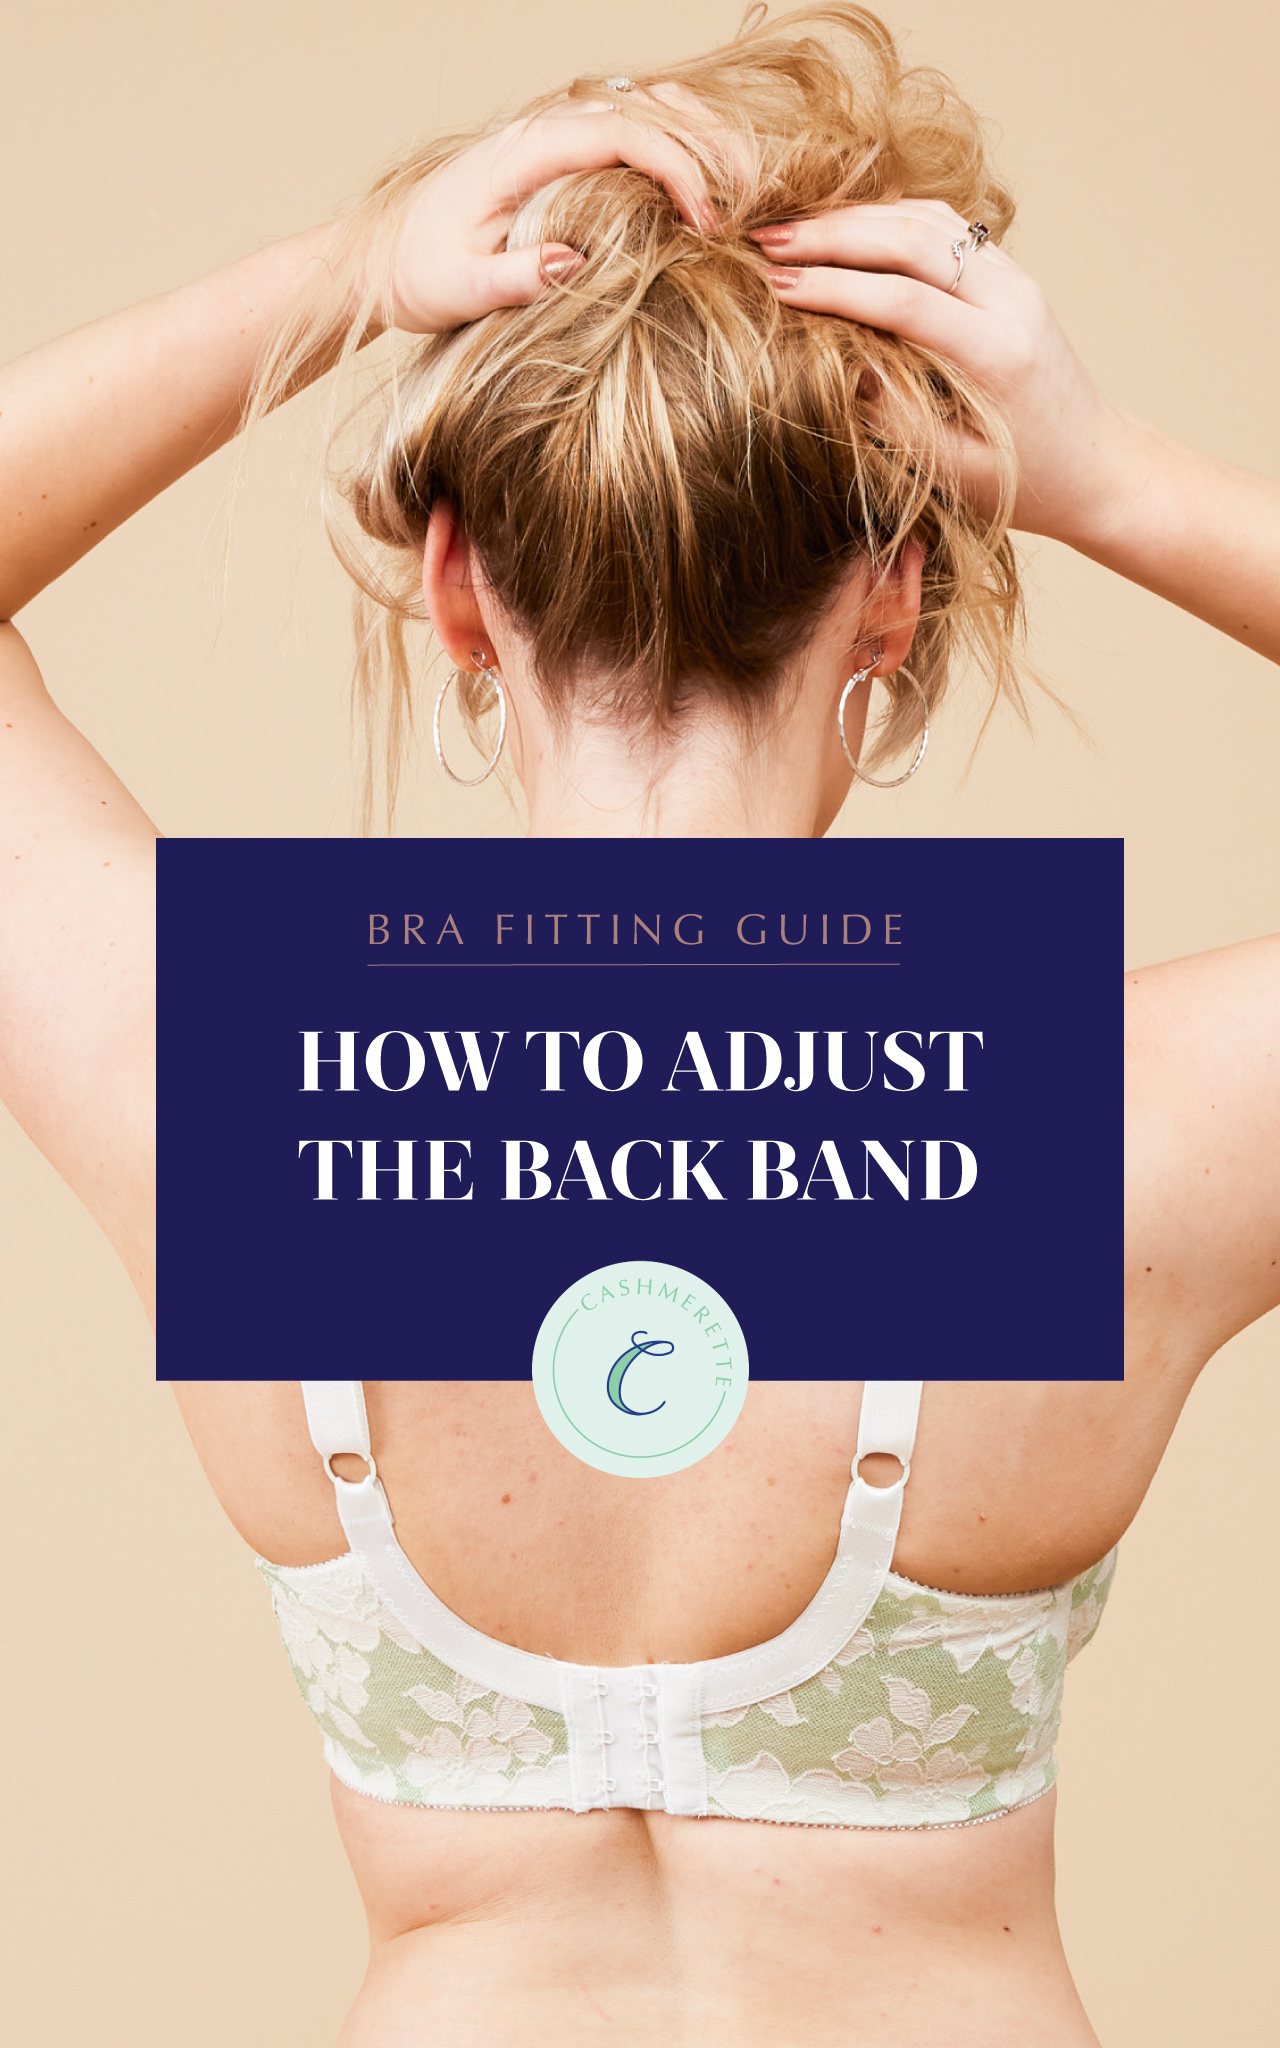 How to Keep Bra Straps in Place: 4 Best Methods